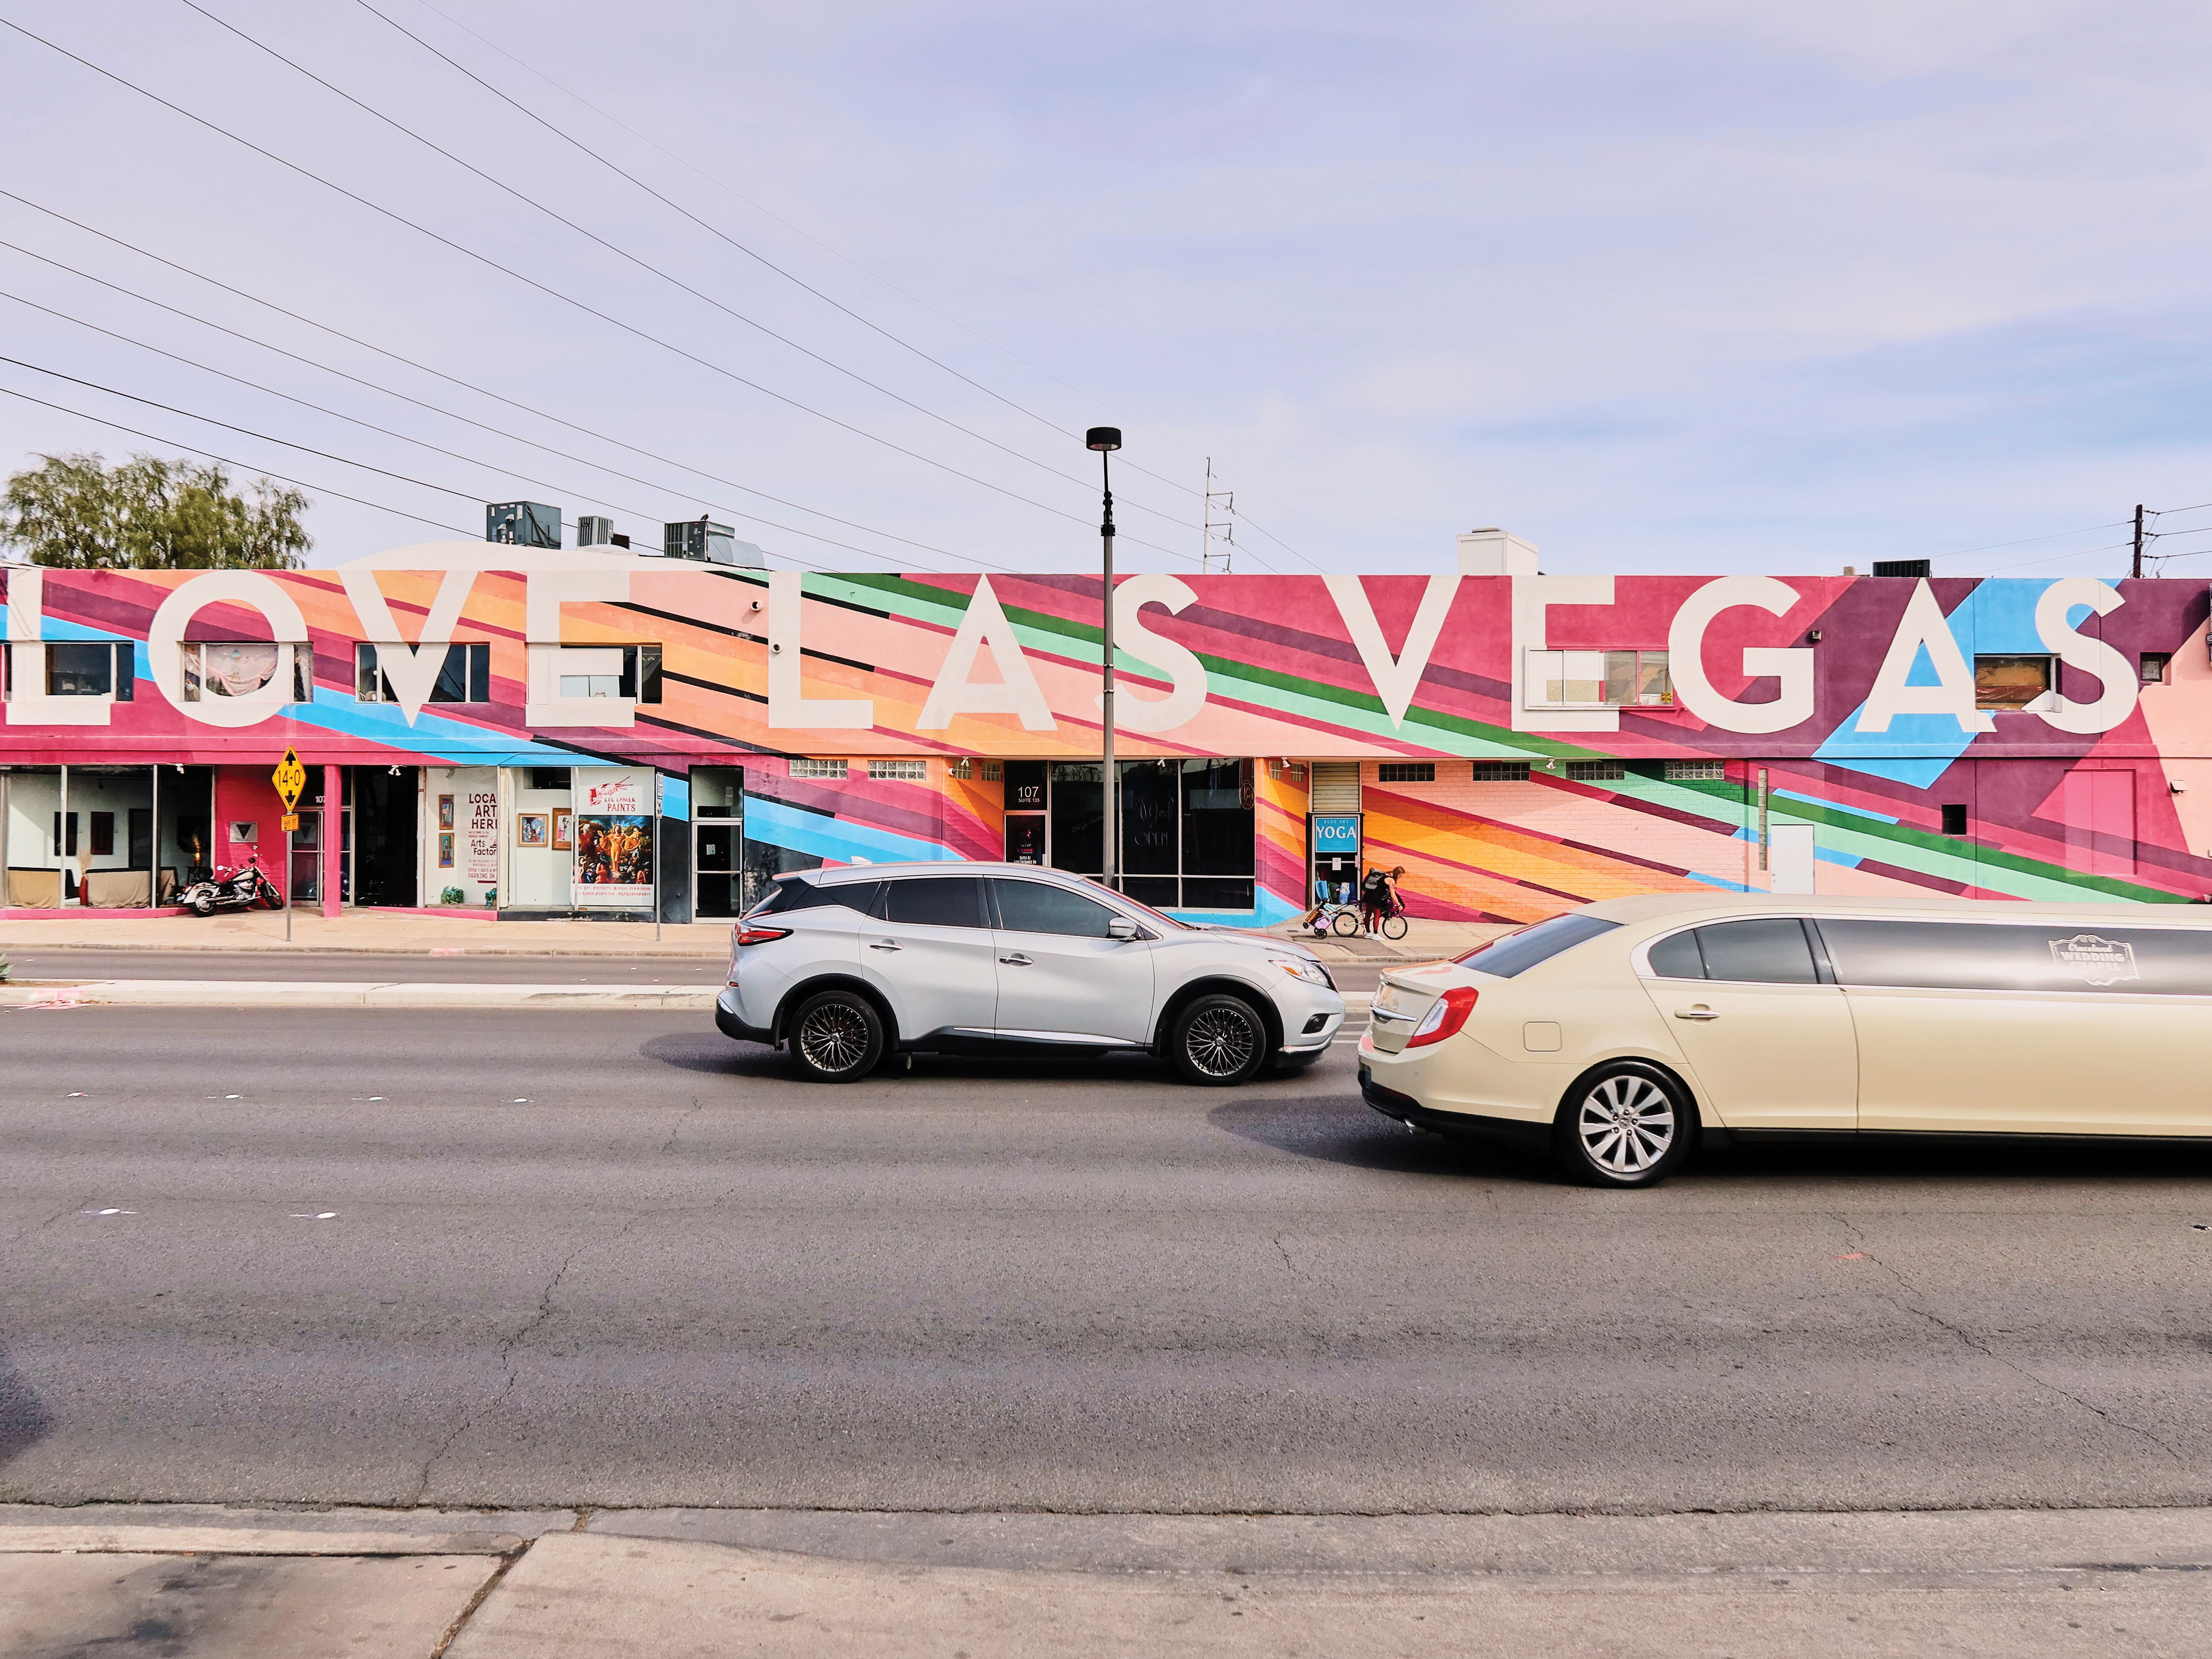 The Arts Factory is a colorful hub in the Los Vegas Arts District.